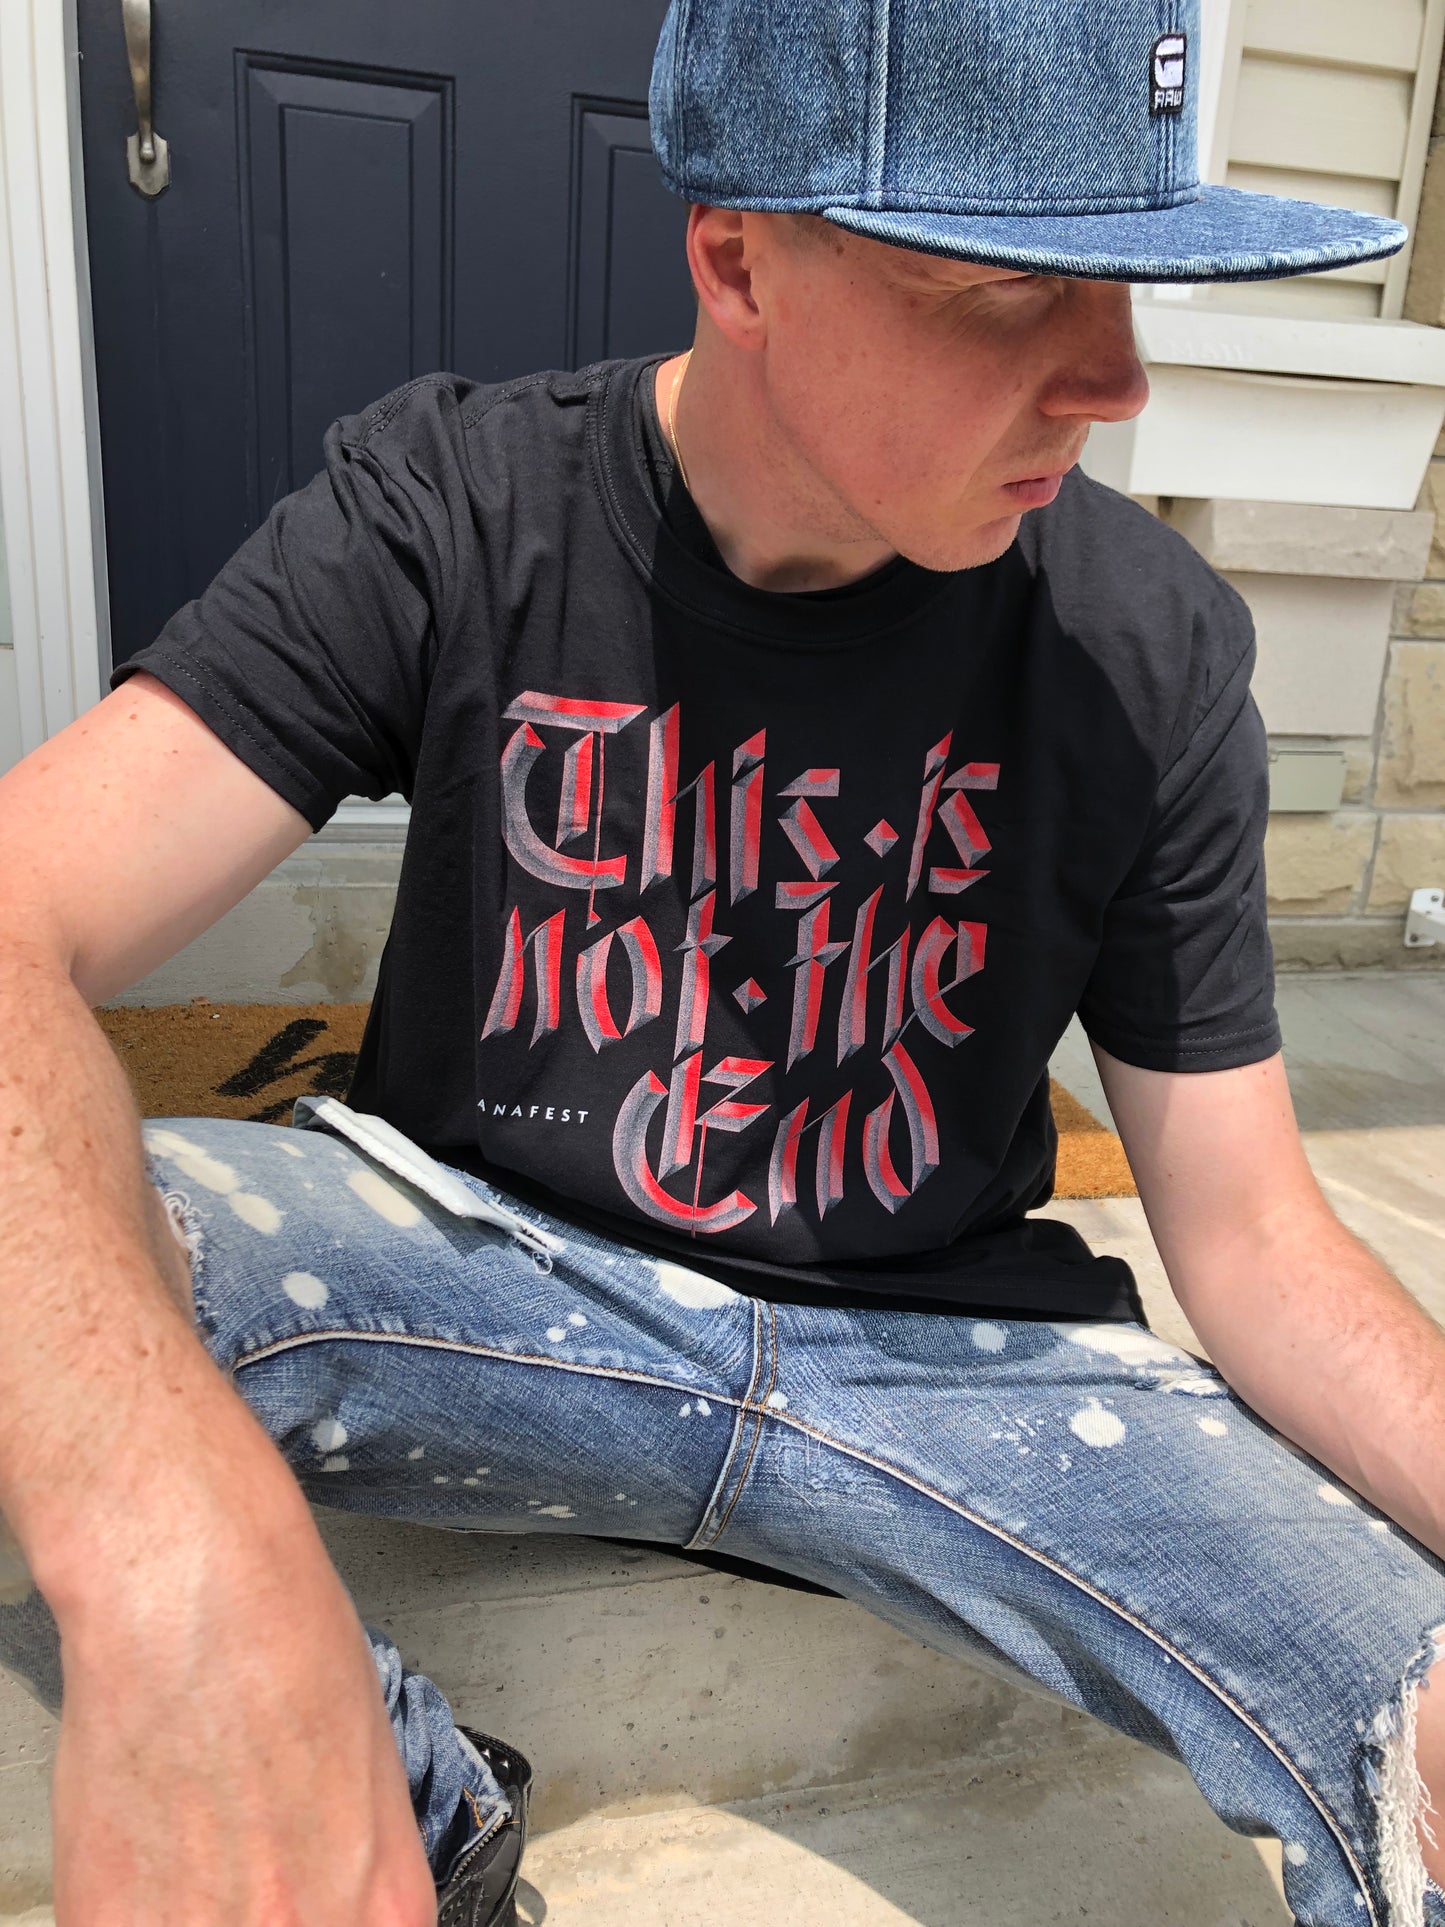 This Is Not The End T-Shirt